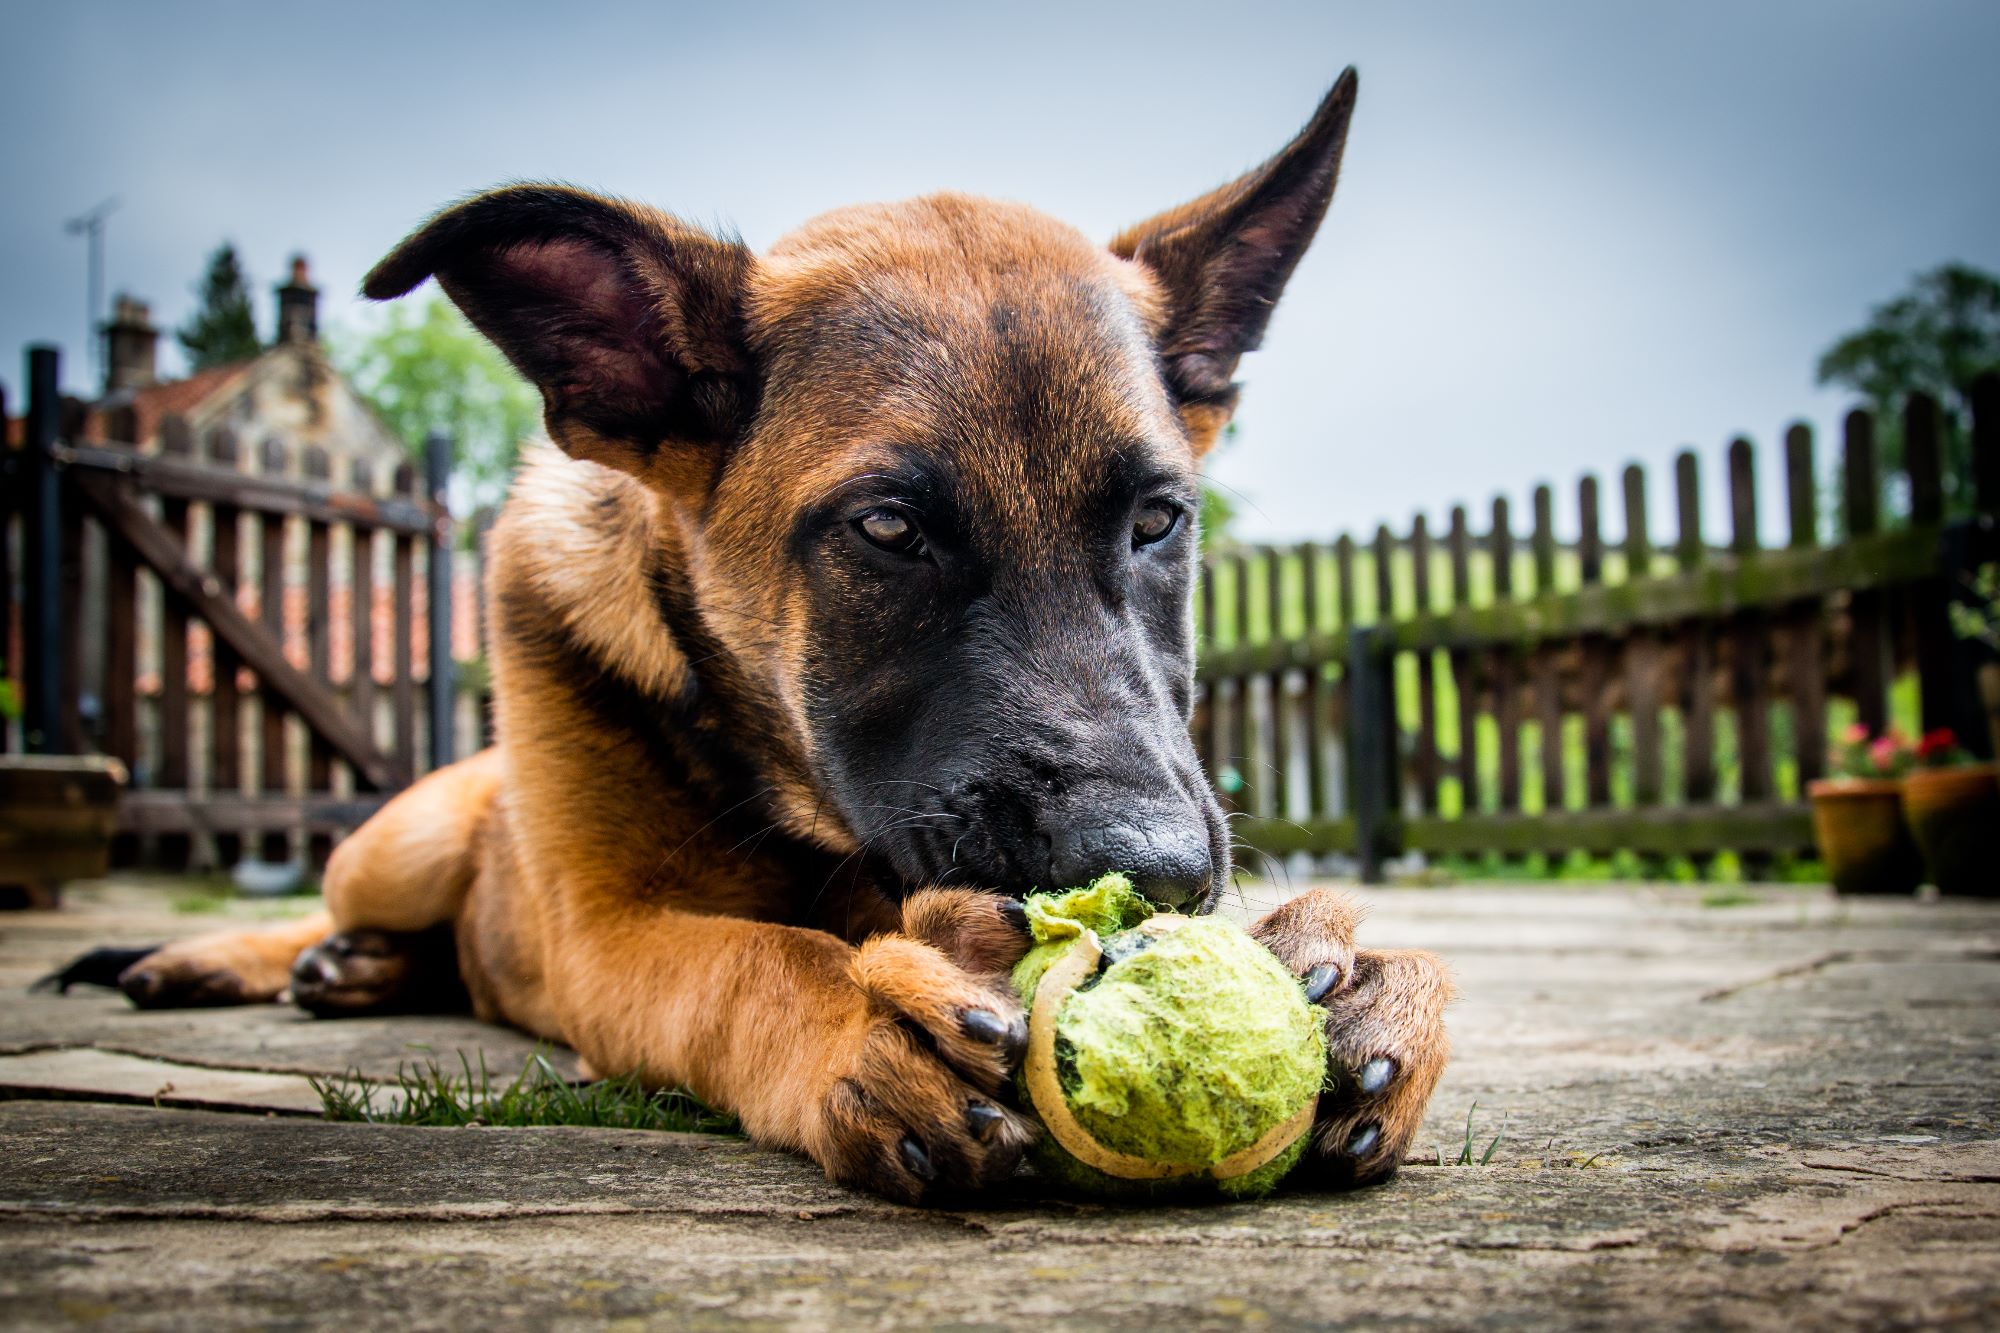 A dutch herder pup is chewing a tennis ball in her owner's garden. The photograph is taken from floor level so the paws and claws look large.